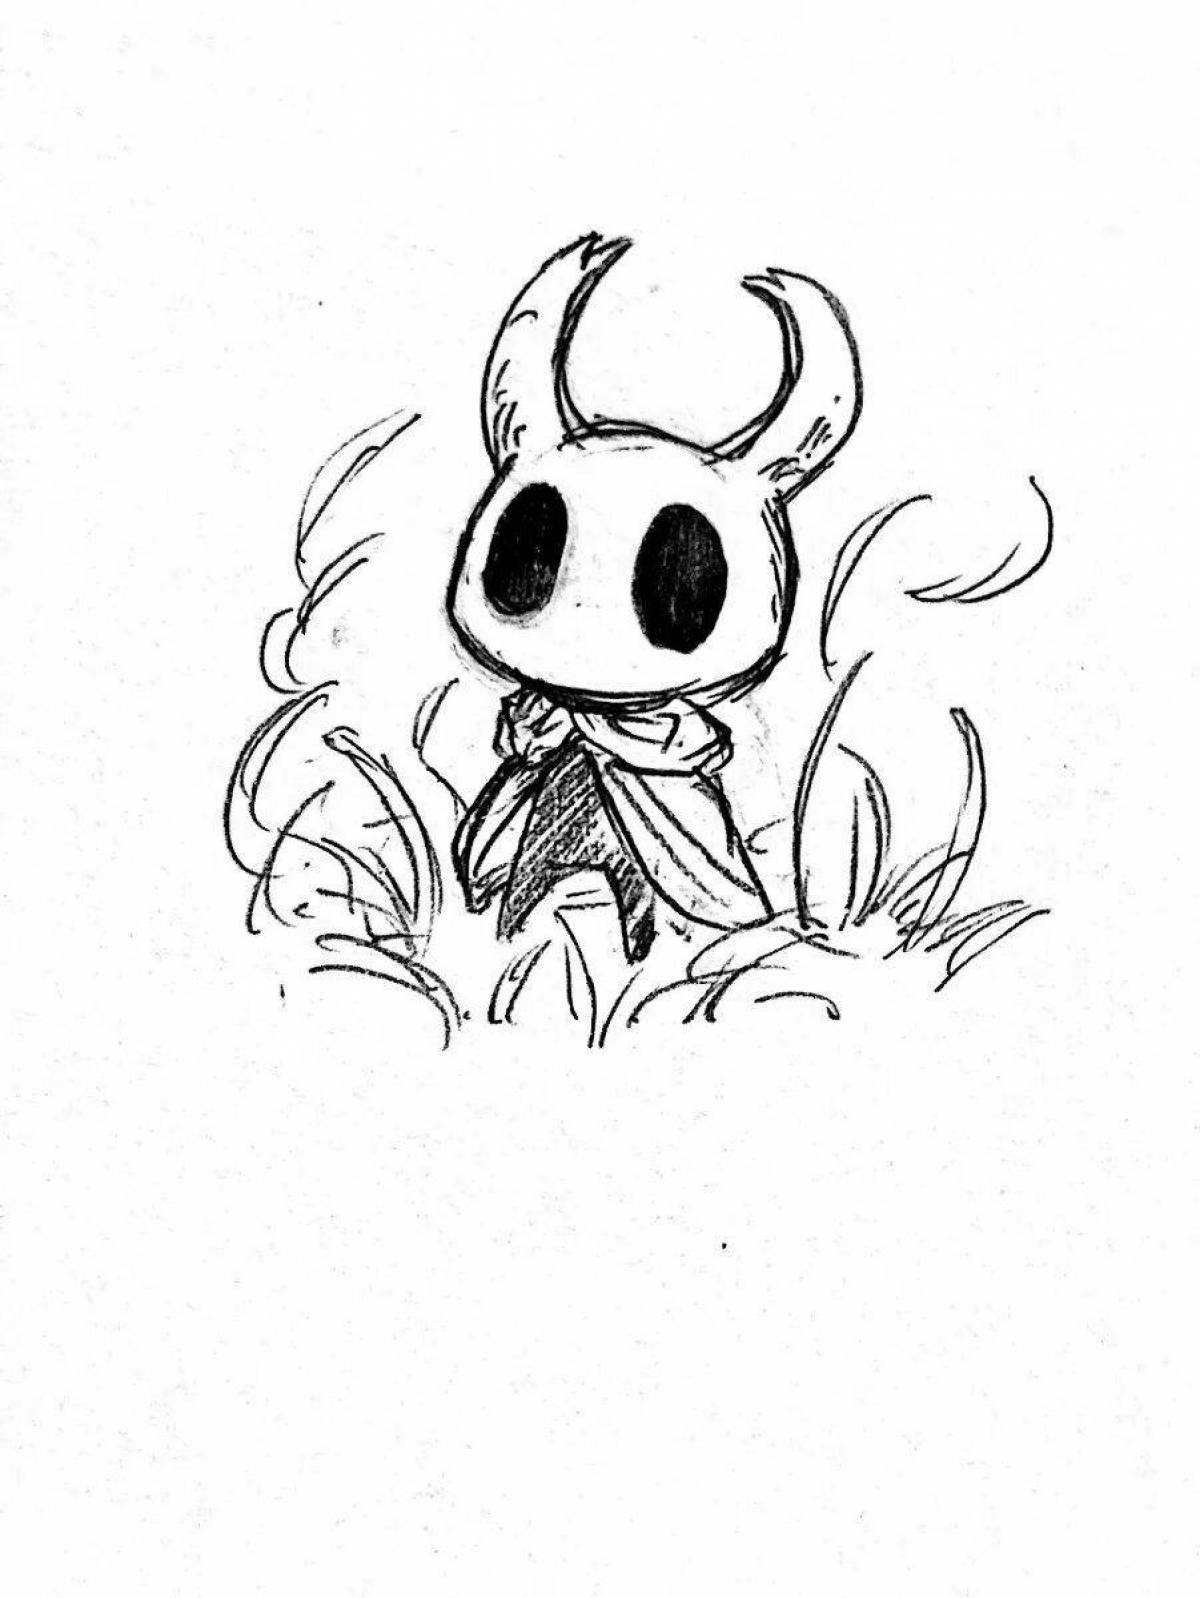 Charming hollow knight coloring book